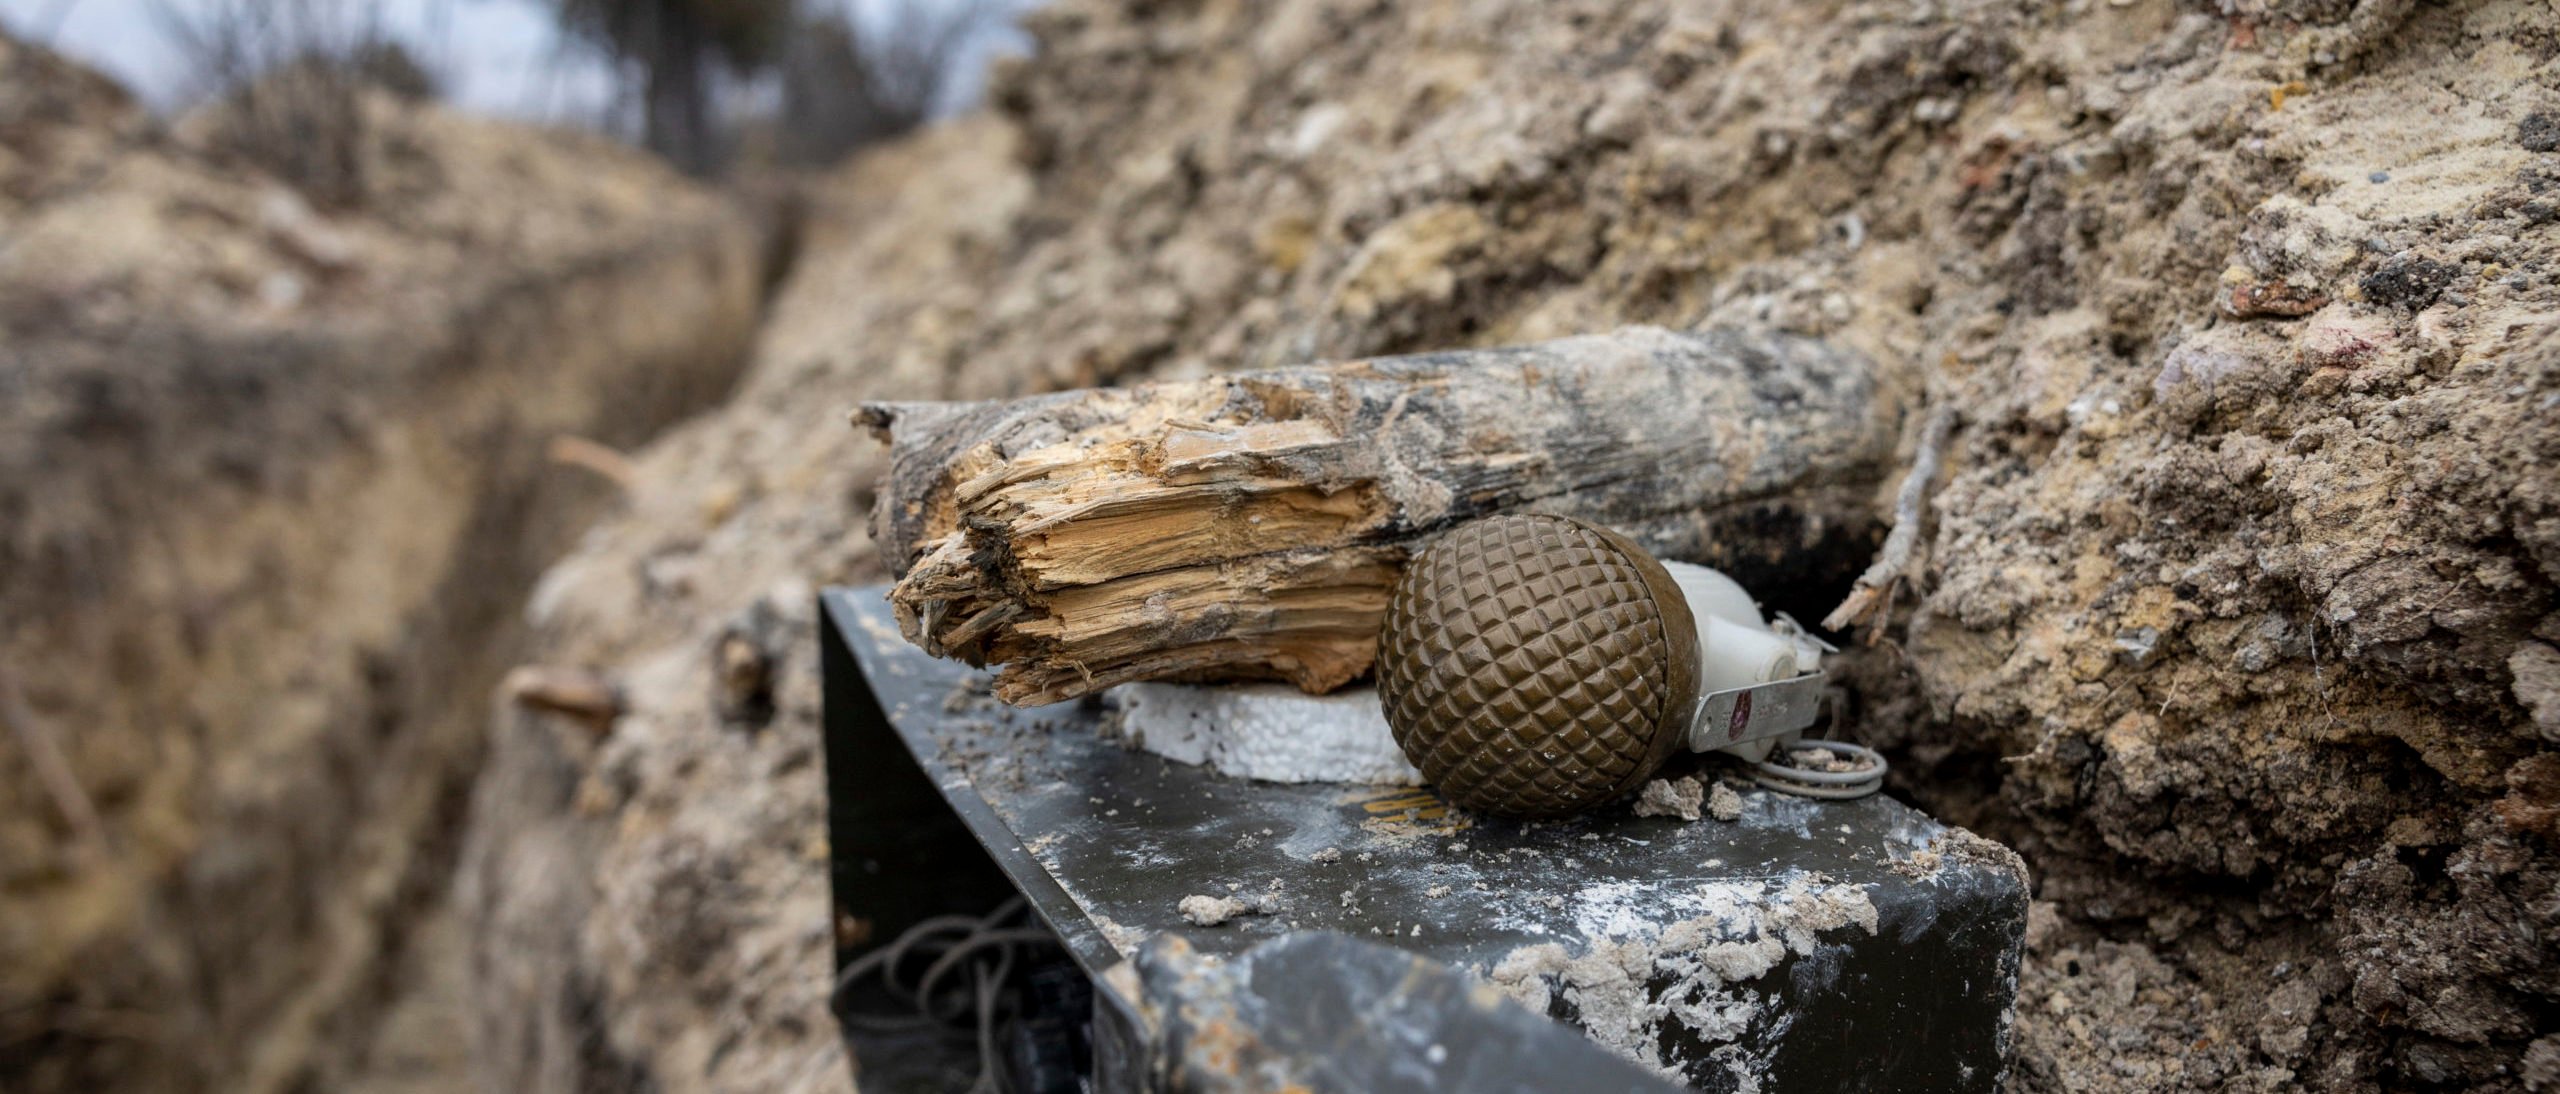 A grenade lies next to a piece of wood in a frontline trench. Image not from story. (Photo by John Moore/Getty Images)